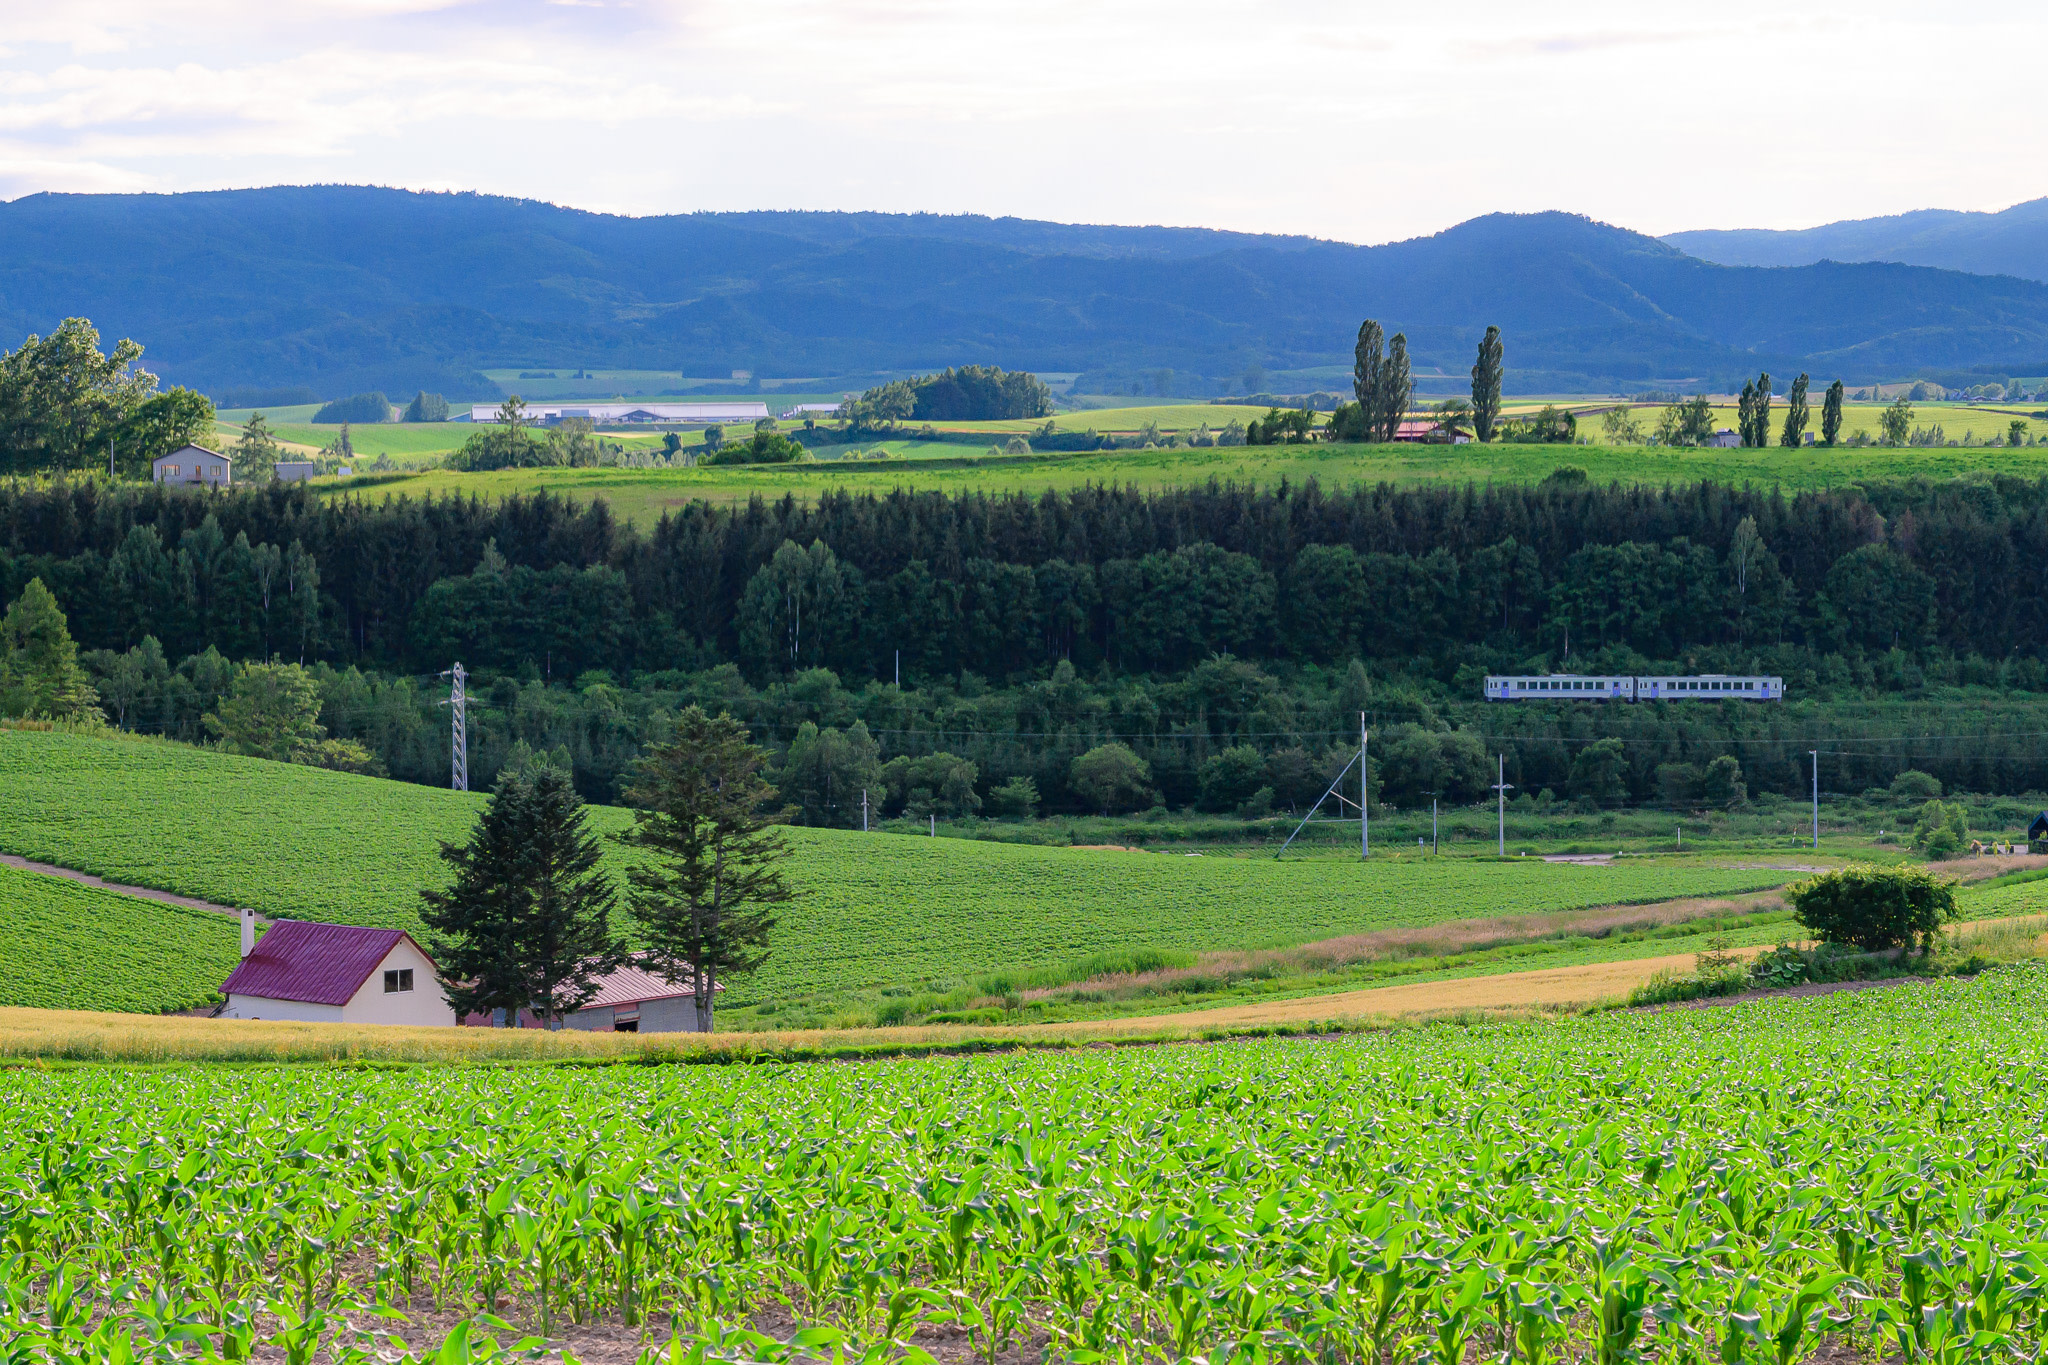 A view of Biei's Hills on a summer afternoon. There is a small hut and a group of trees in the mid-ground. In a valley in the distance, a two-carriage train runs along the JR Furano Line.